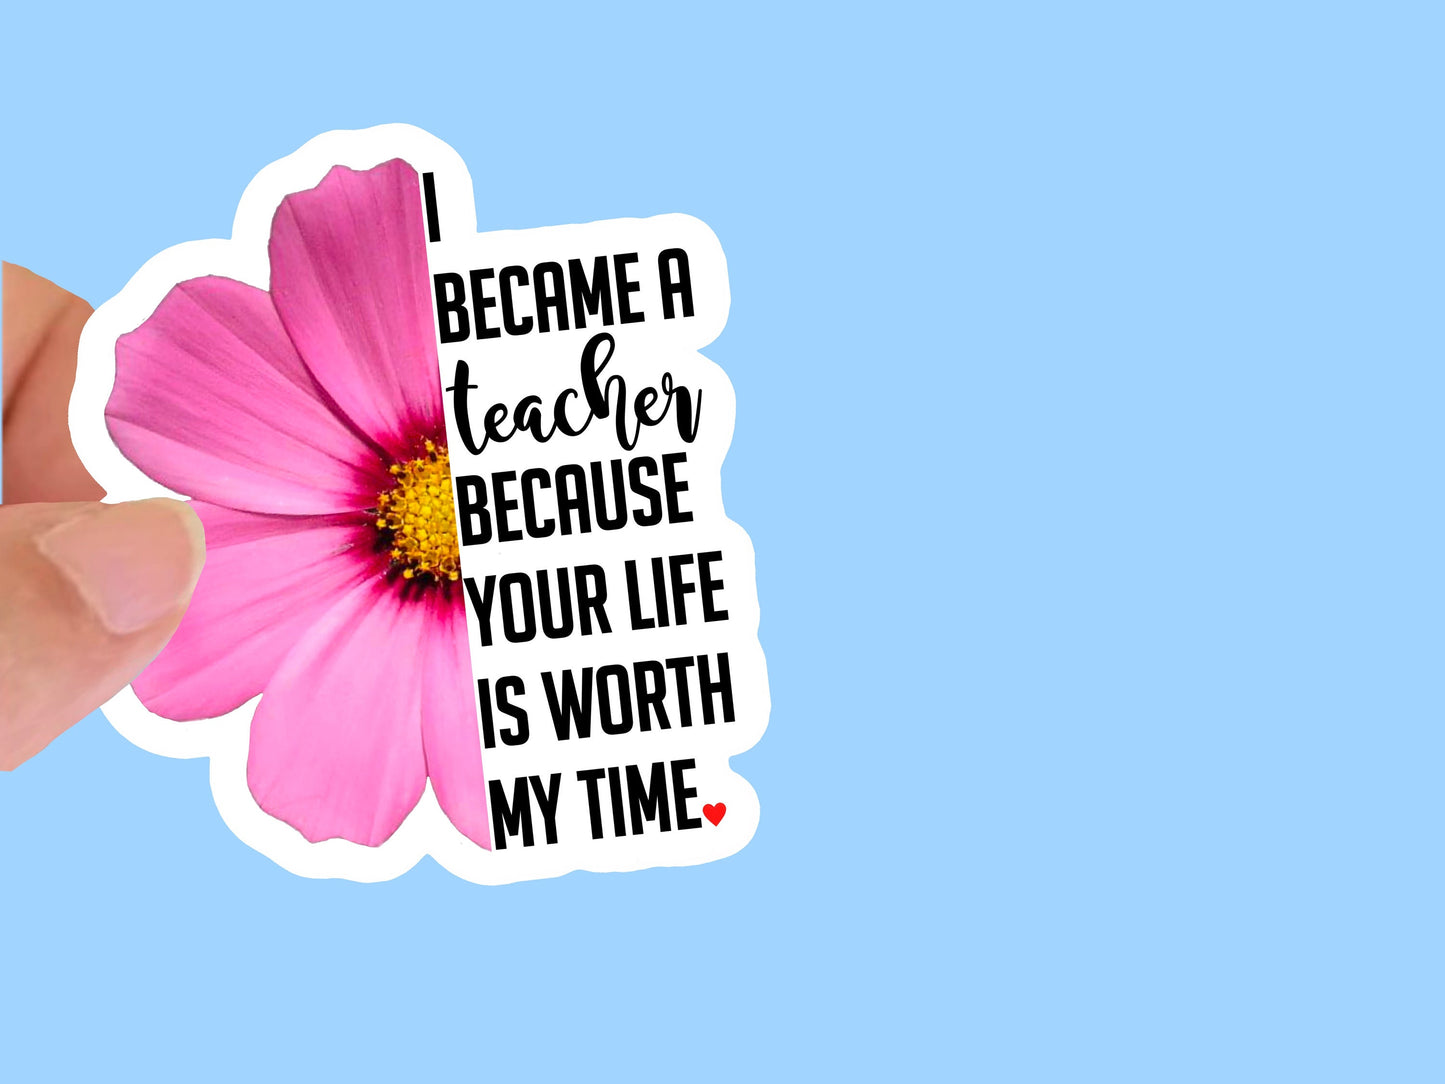 I became a teacher because your life is worth my time Waterproof Sticker, Laptop or Water Bottle Vinyl decal, Gift for teacherchoice of size